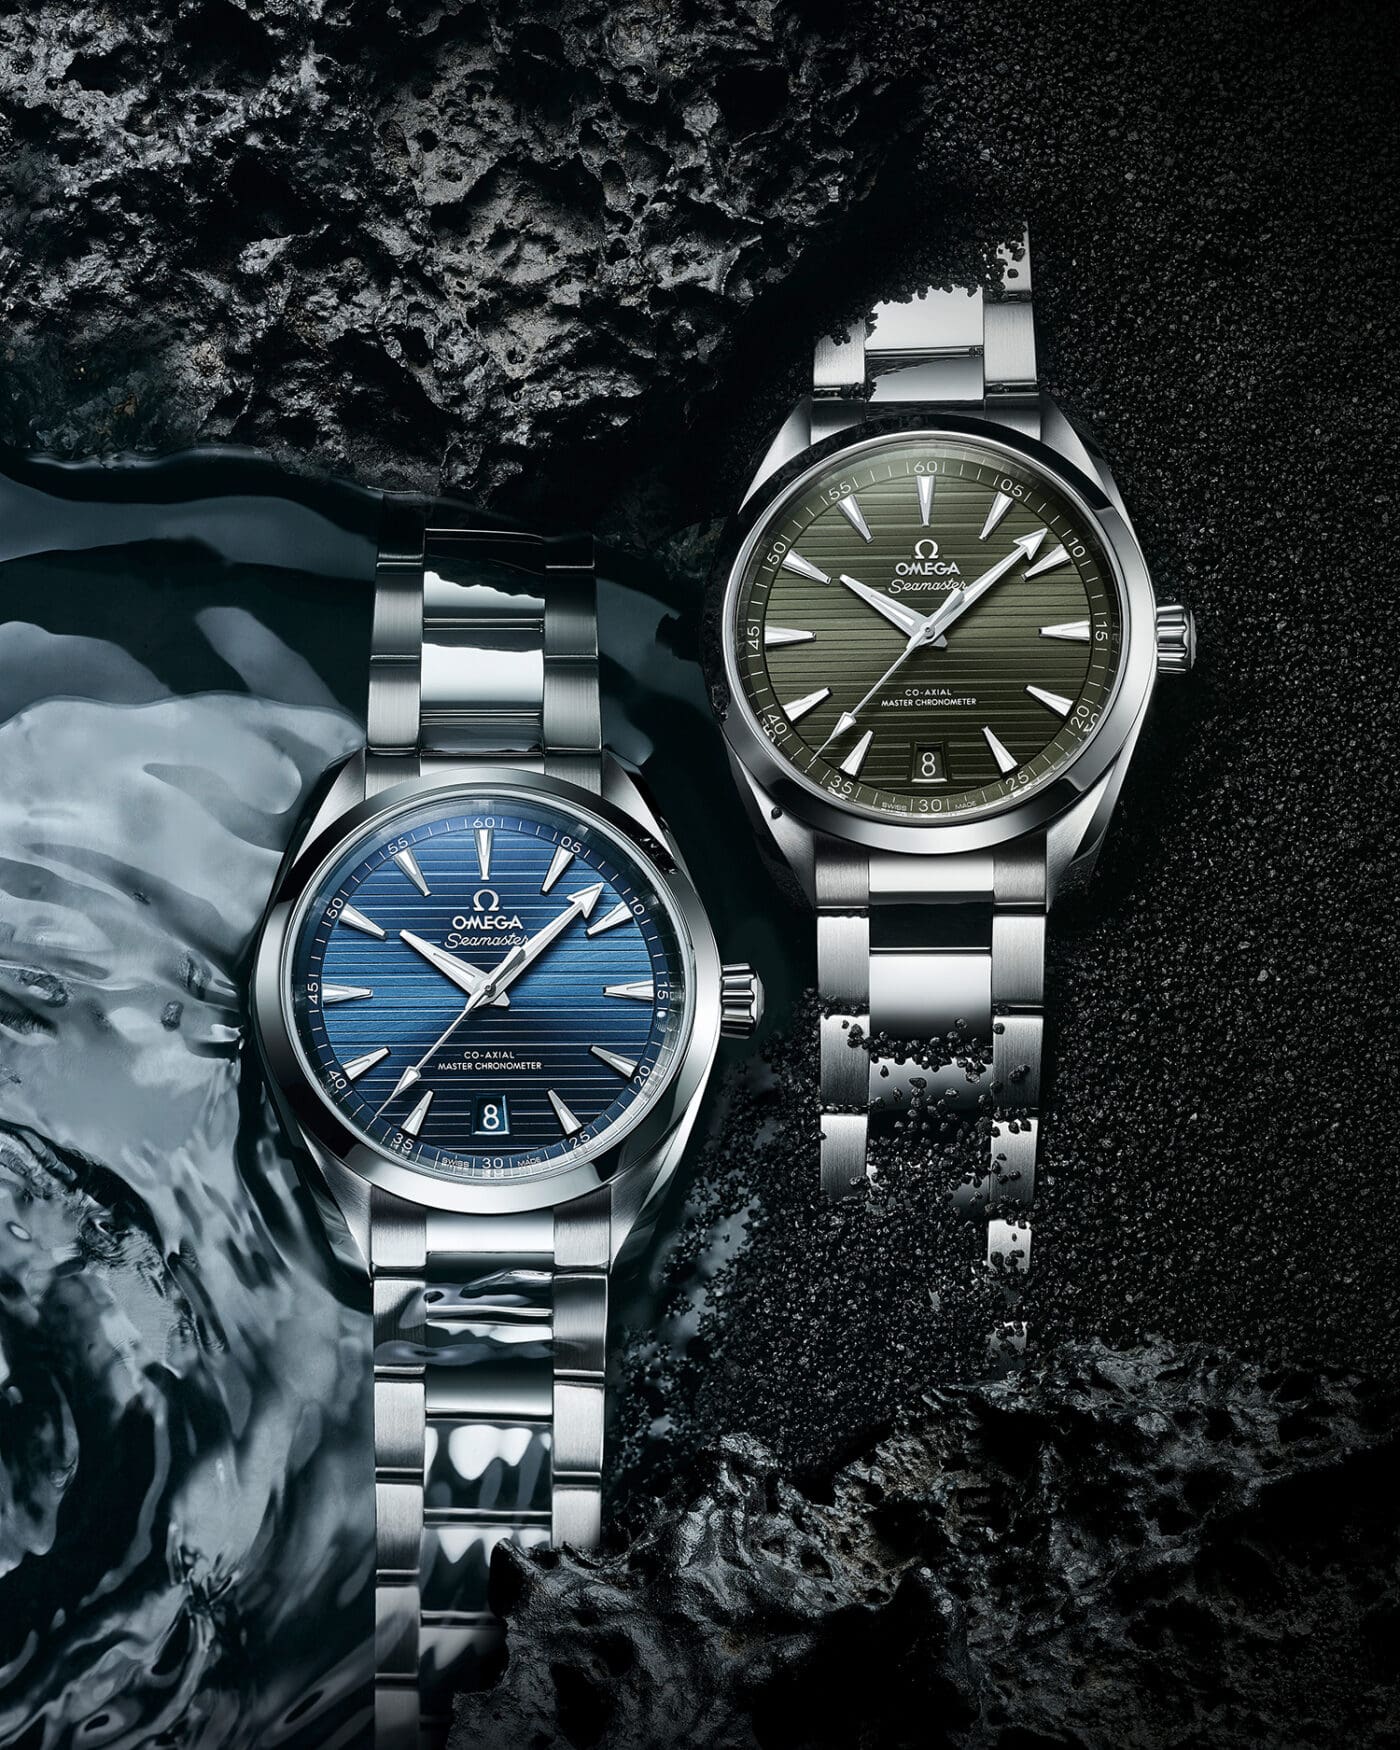 Watches you shouldn’t miss, from Omega, Bulgari, Casio and Jaquet Droz